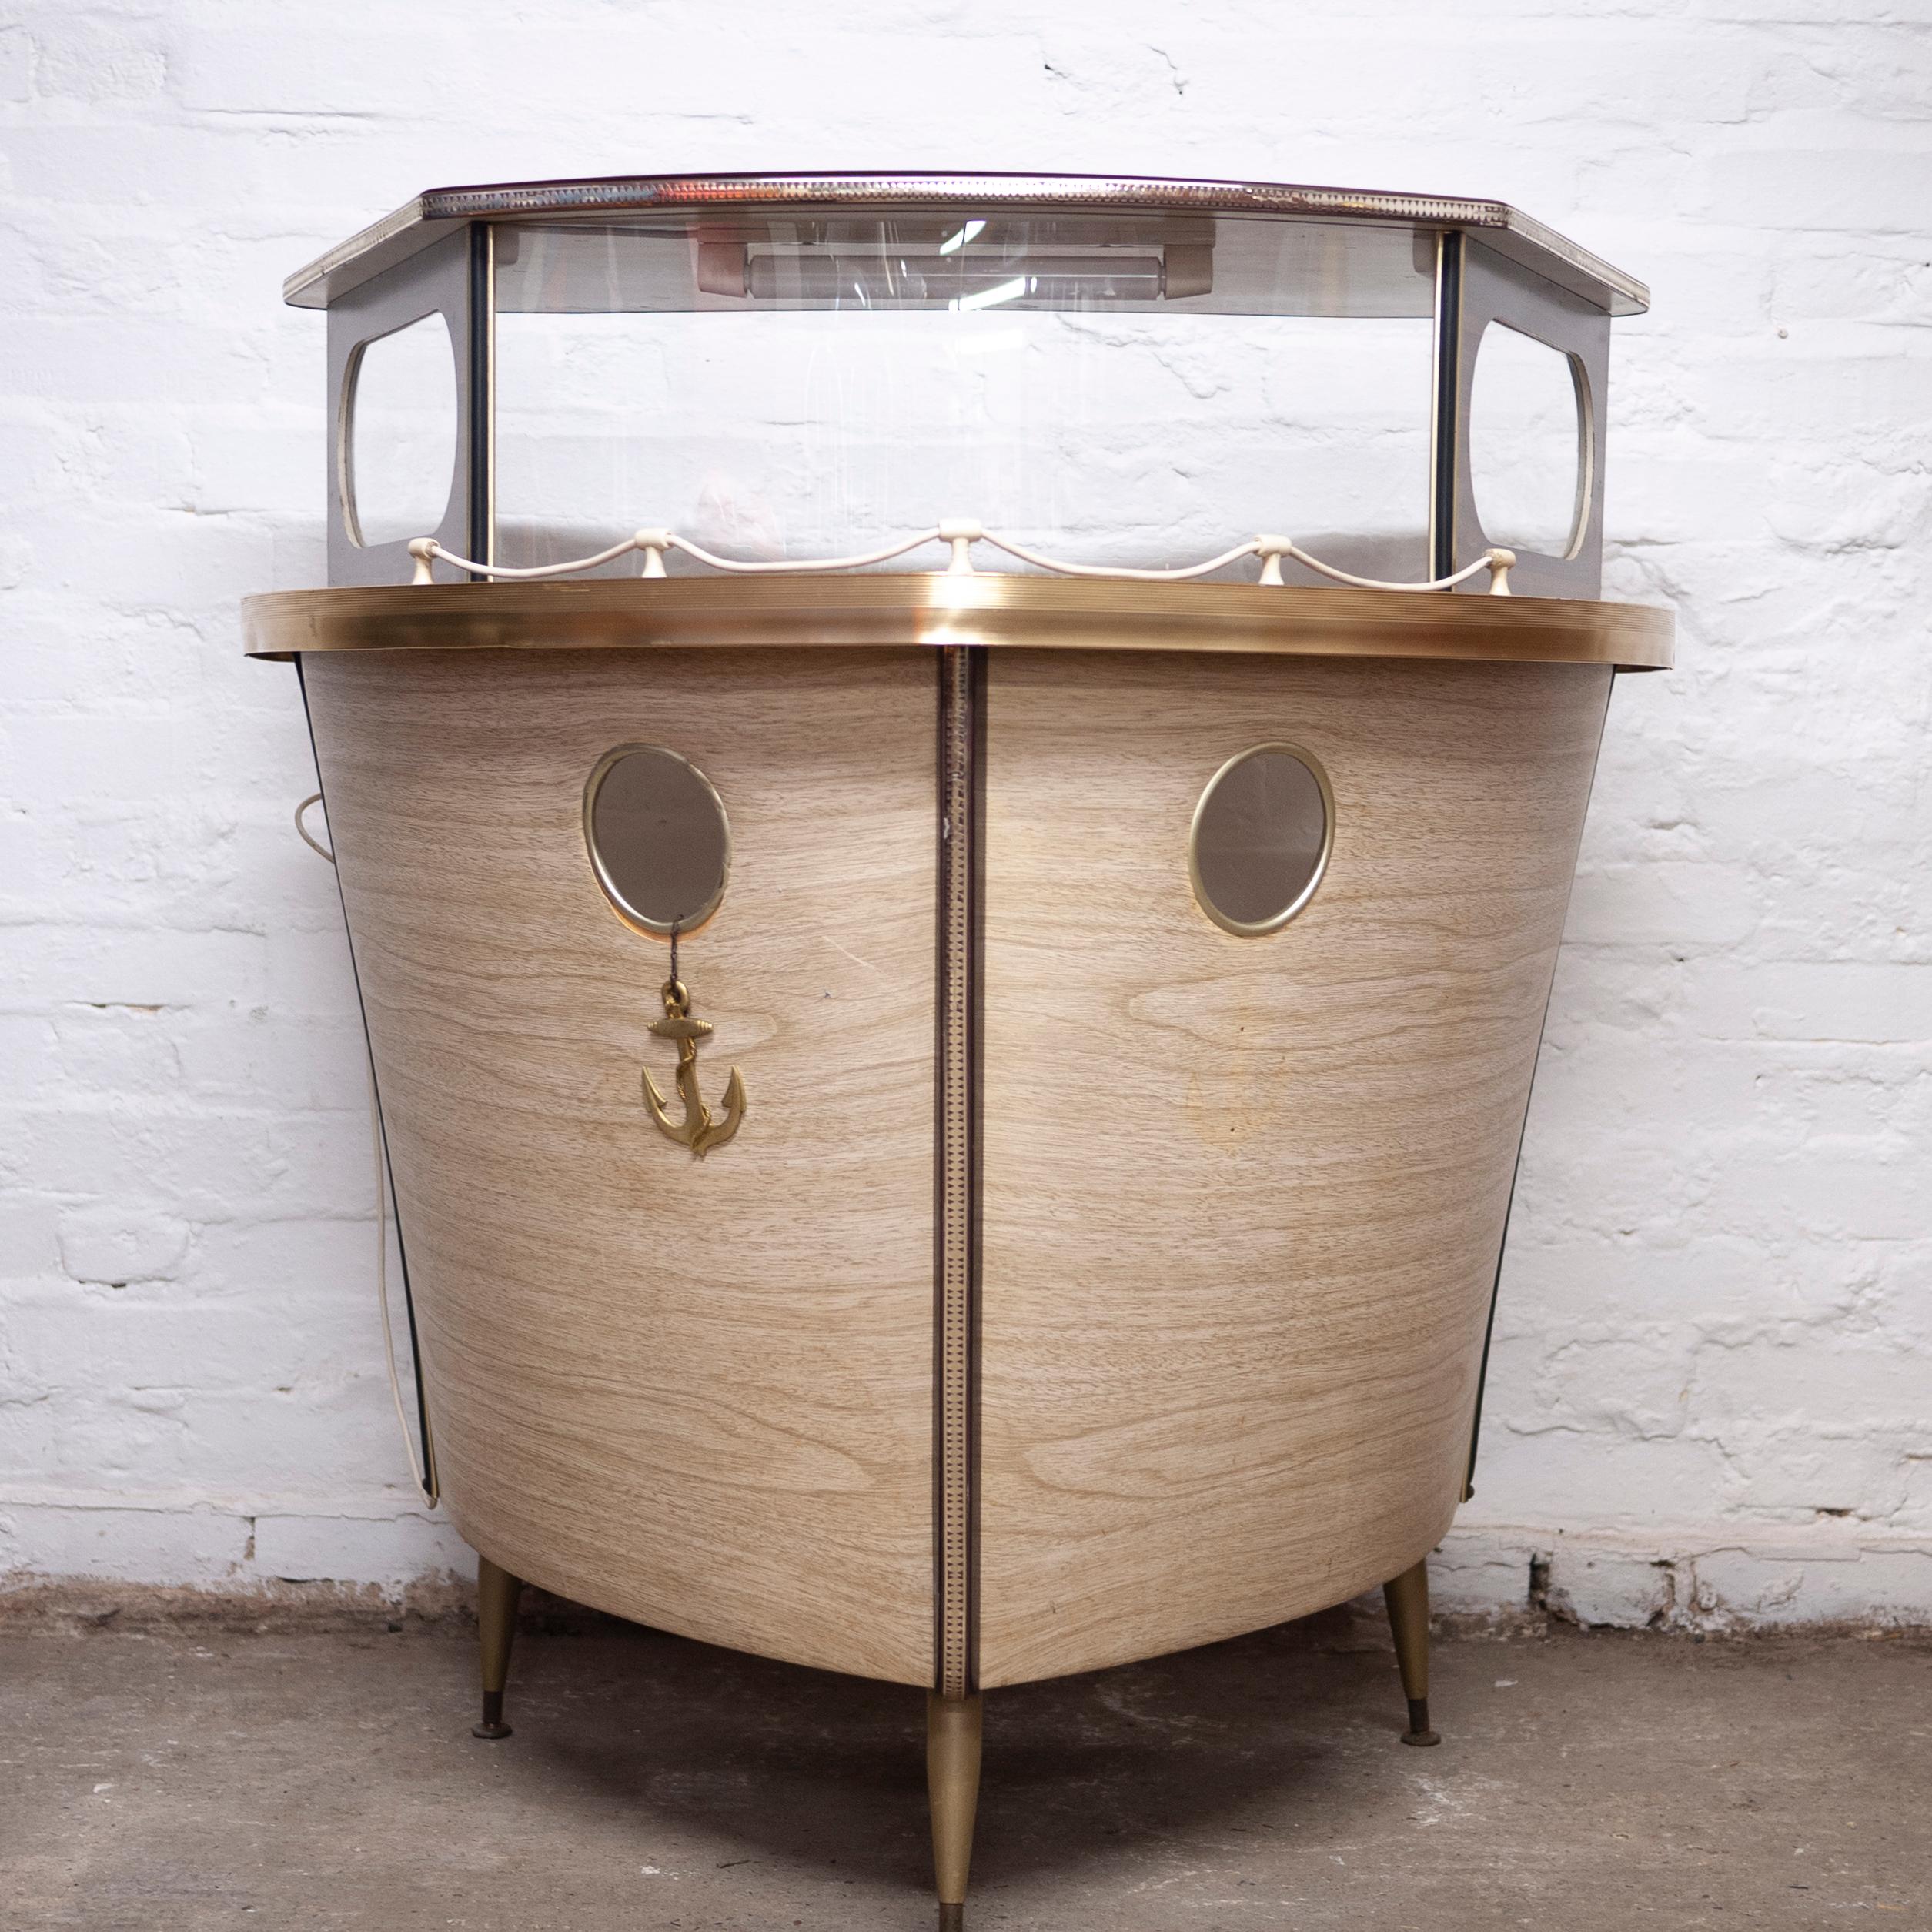 Vintage Light Up Boat Cocktail Bar with Anchor, 1950s For Sale 7